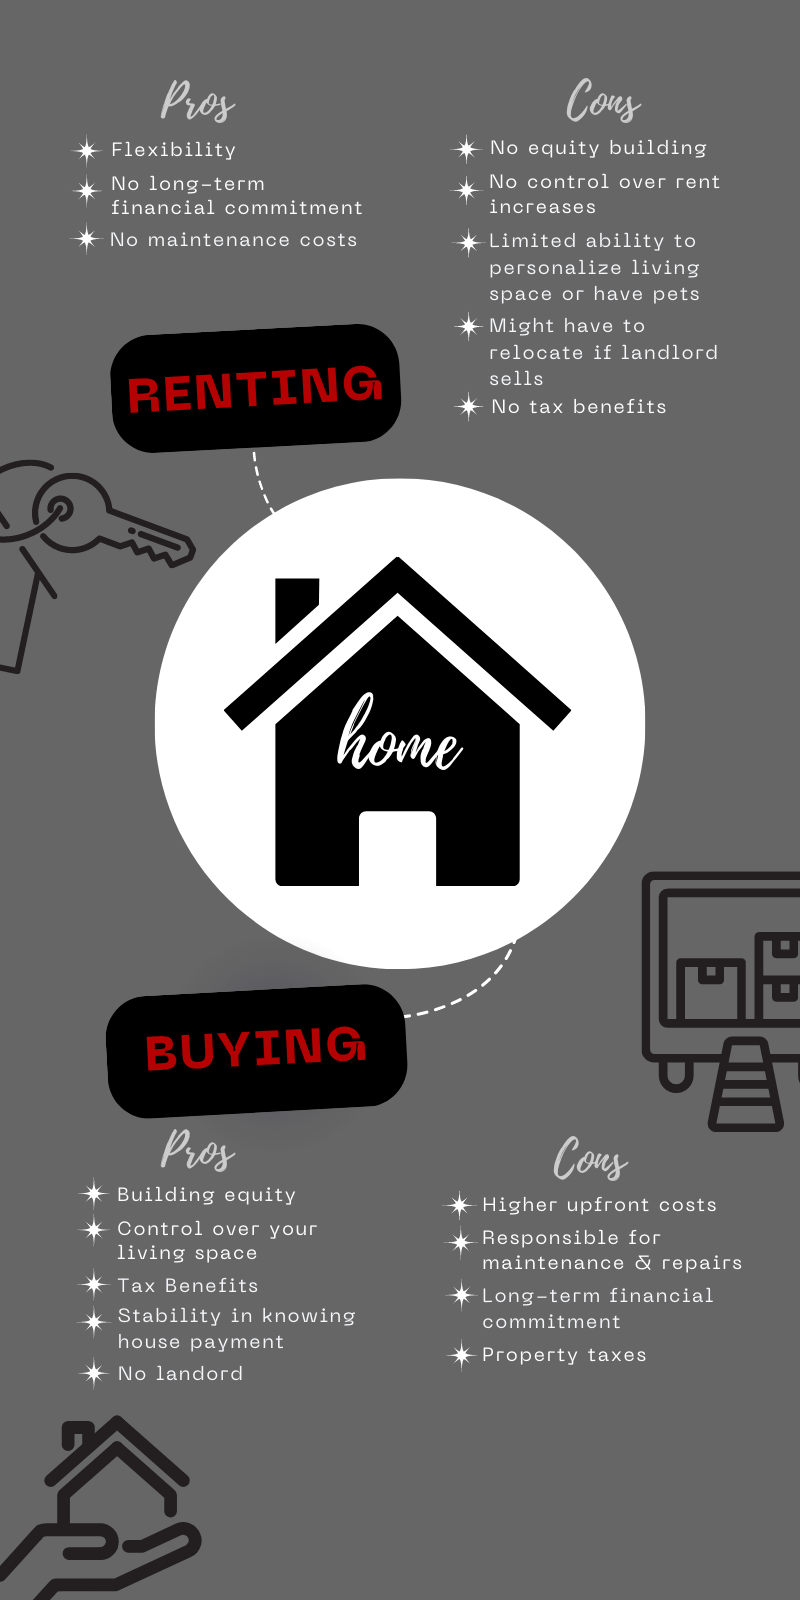 infographic showing the pros and cons of renting vs buying a home